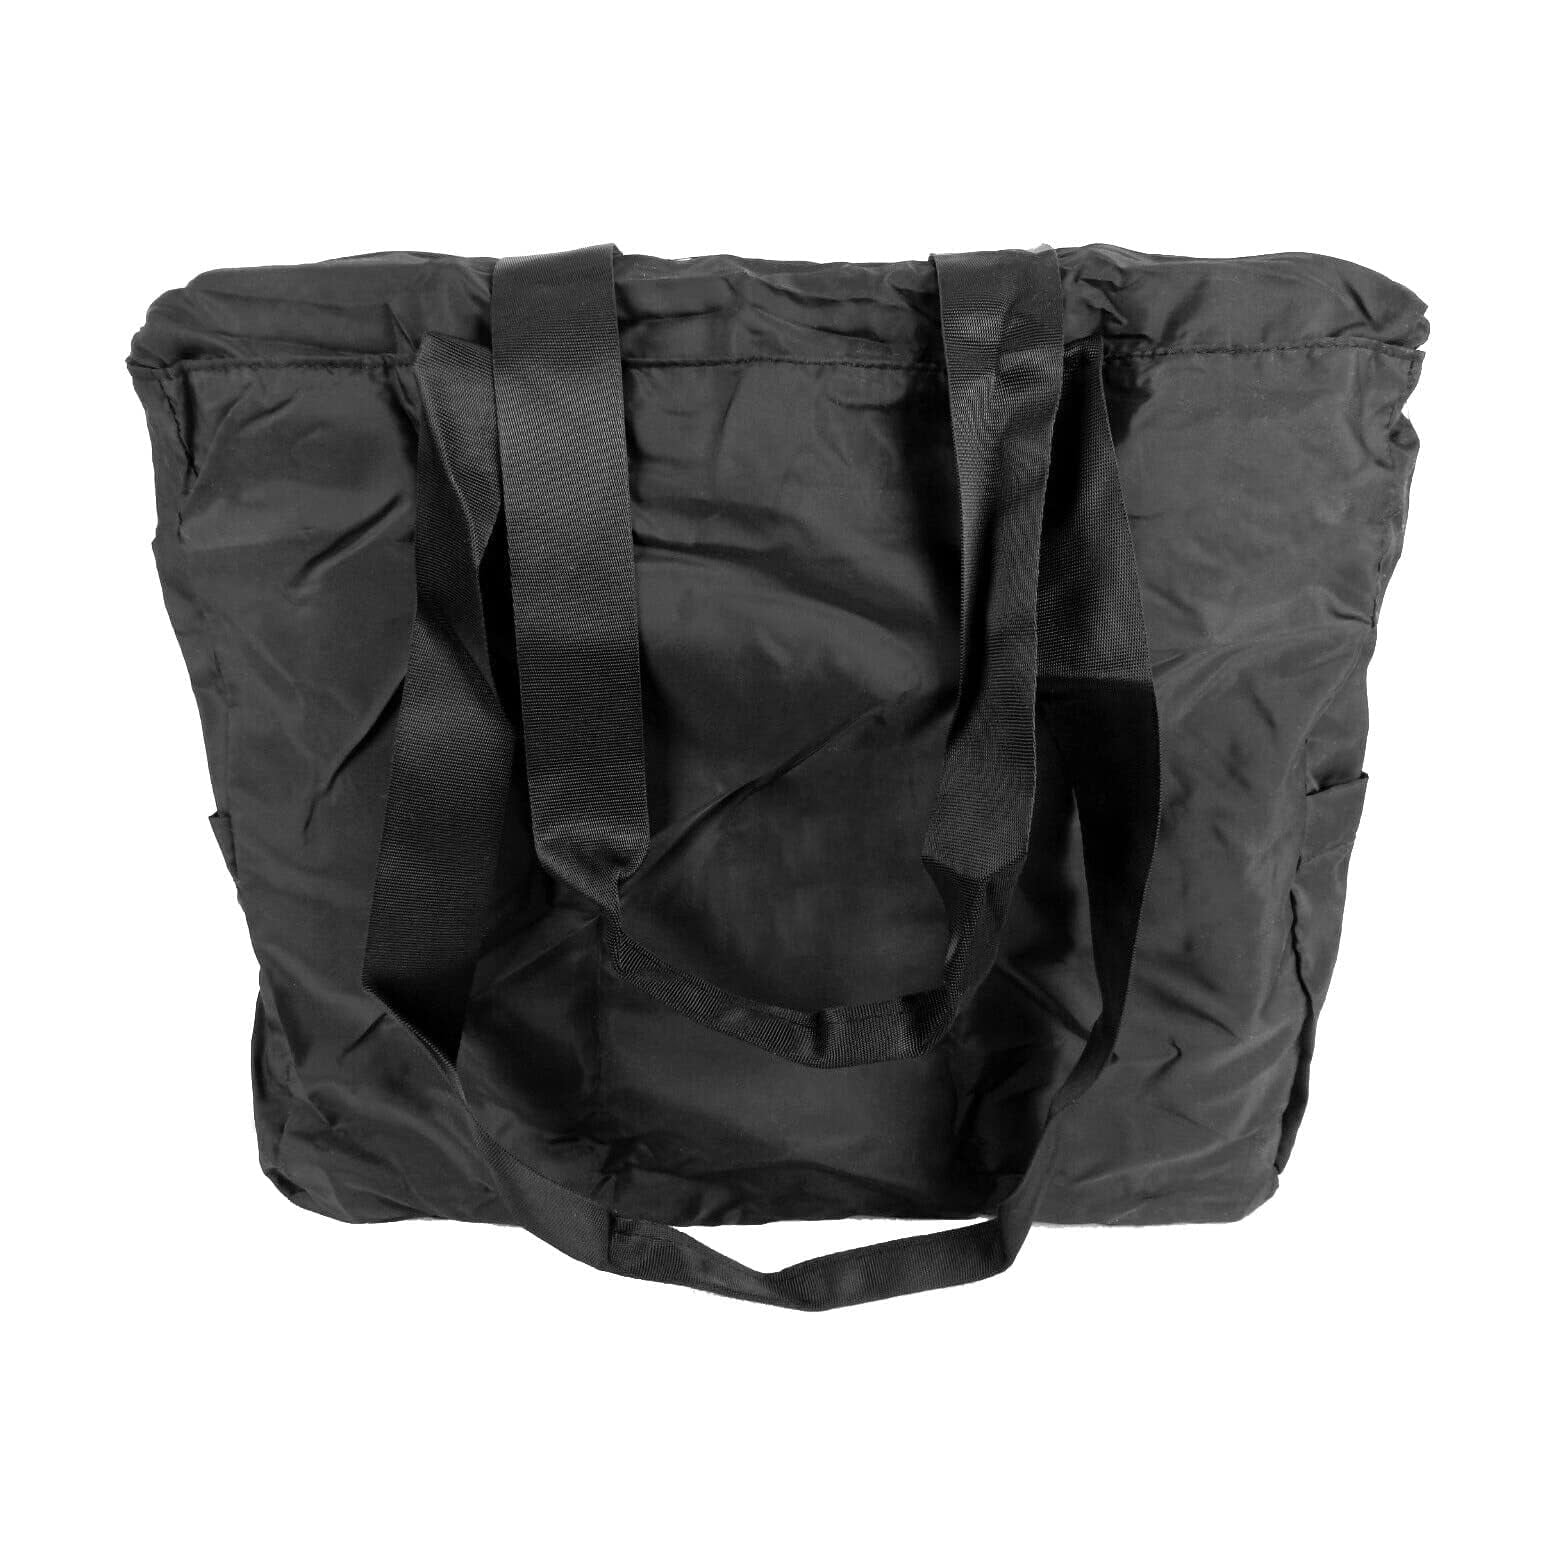 Packable Shopping Bag